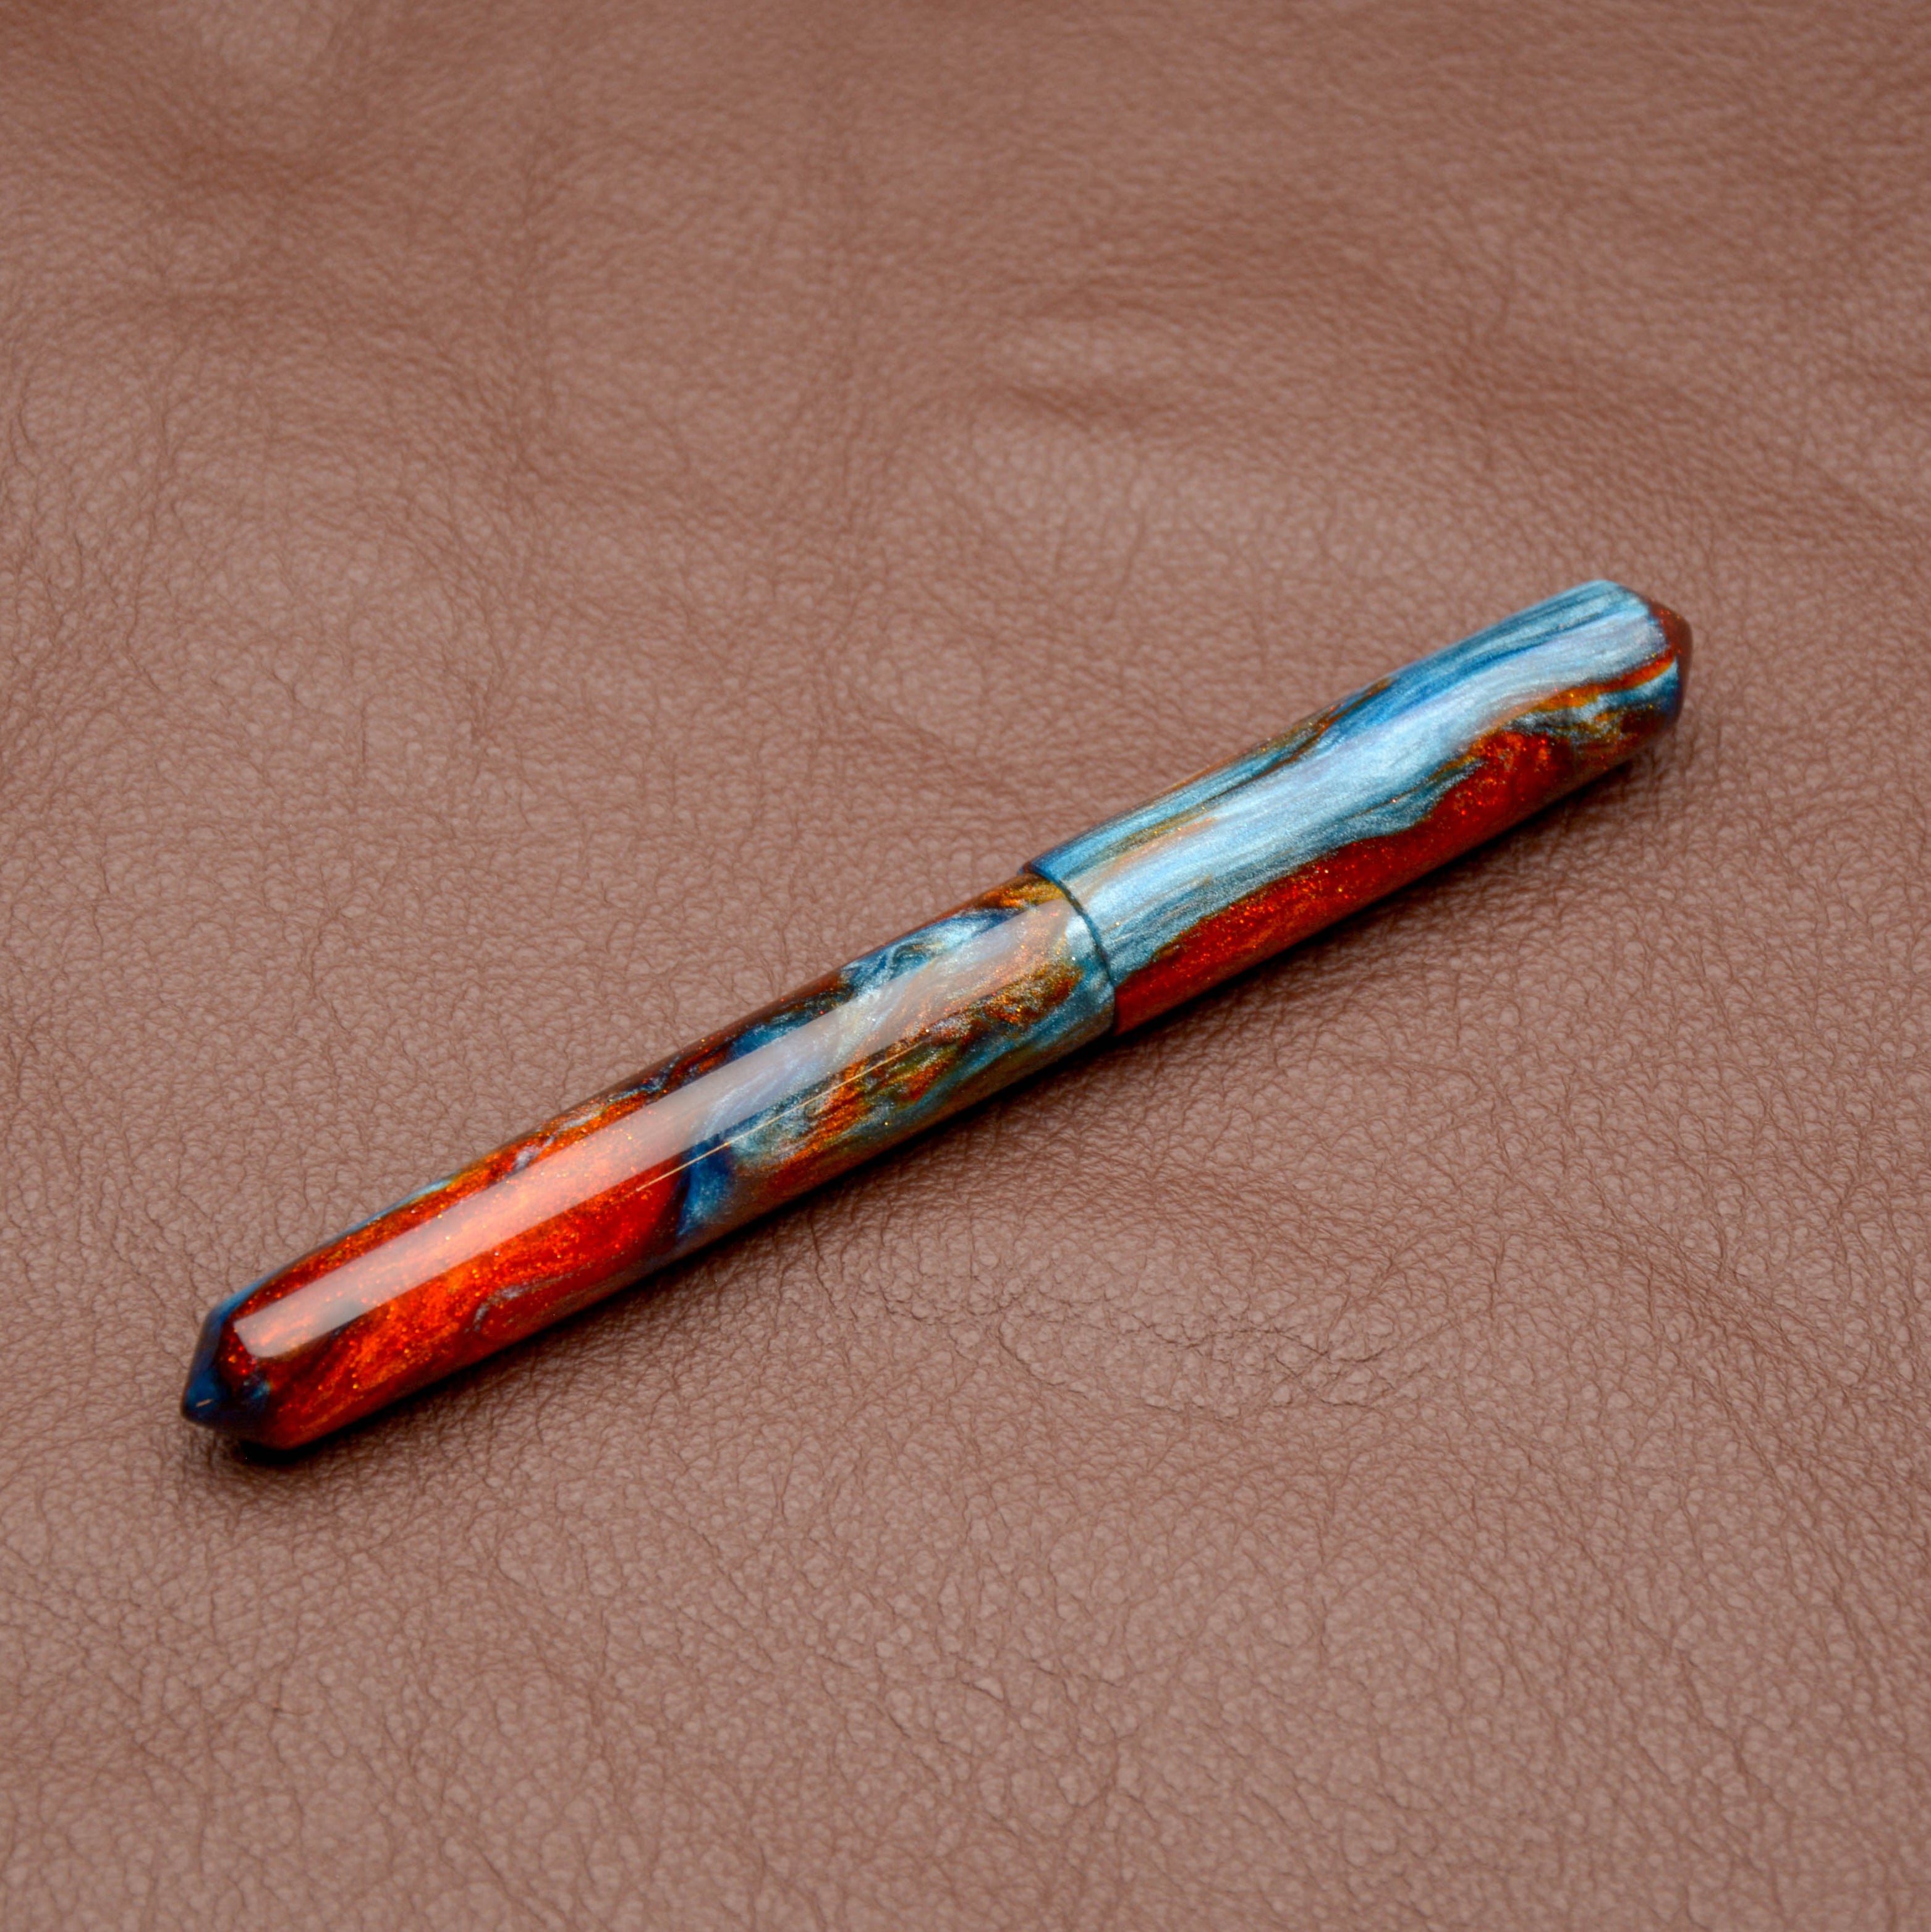 Fountain Pen - Bock #6 - 13 mm - In-house orange and light blue with fireopal glitters in the orange